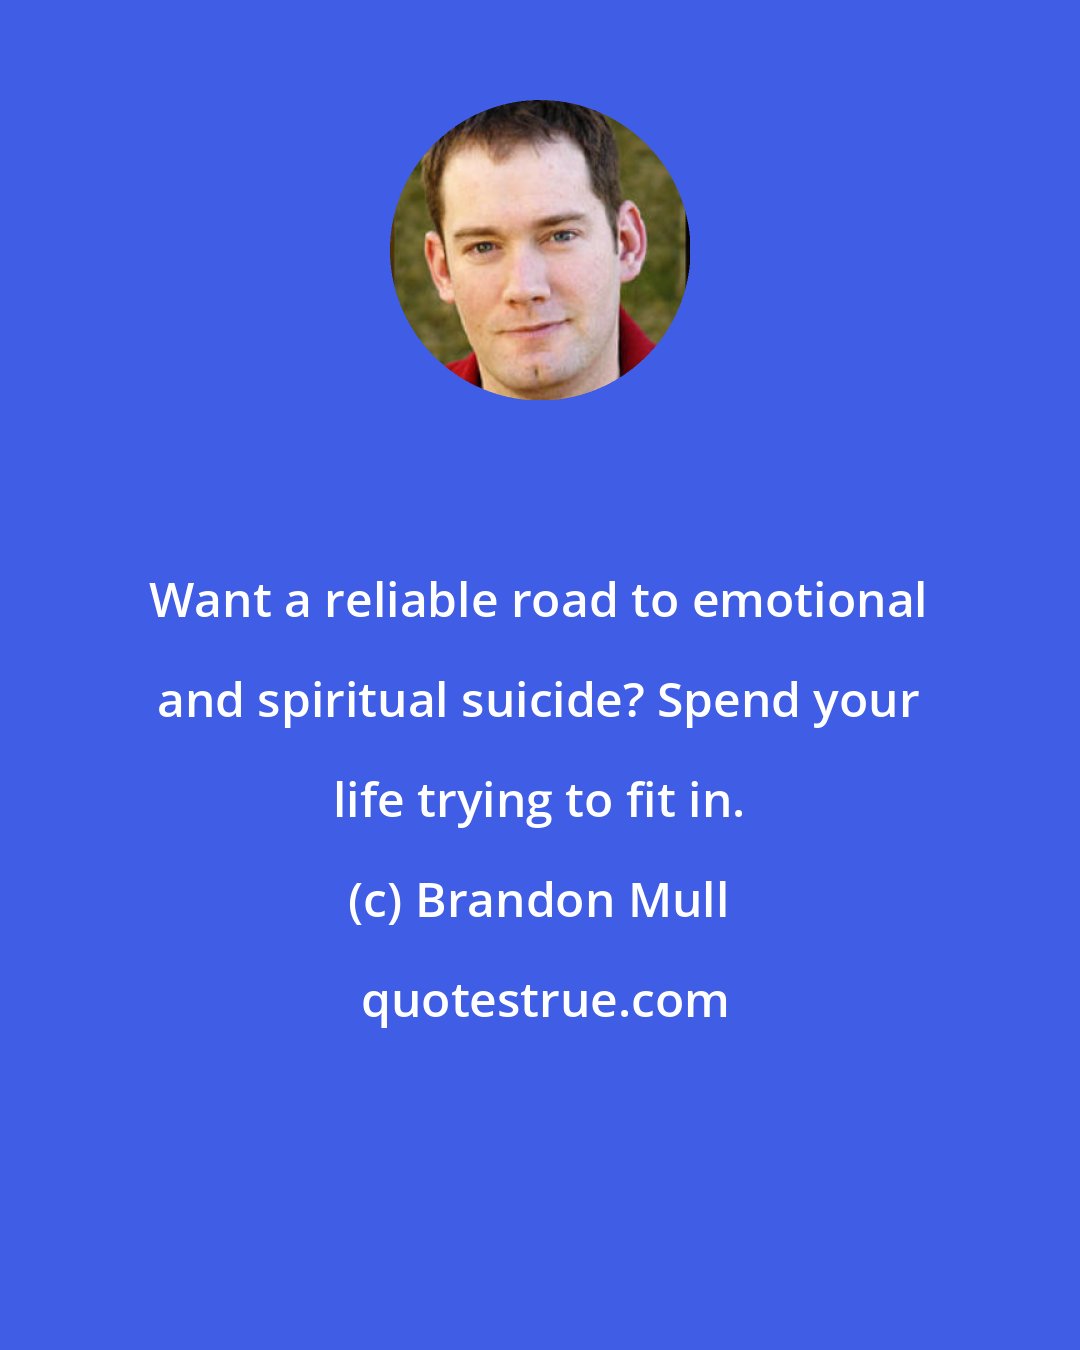 Brandon Mull: Want a reliable road to emotional and spiritual suicide? Spend your life trying to fit in.